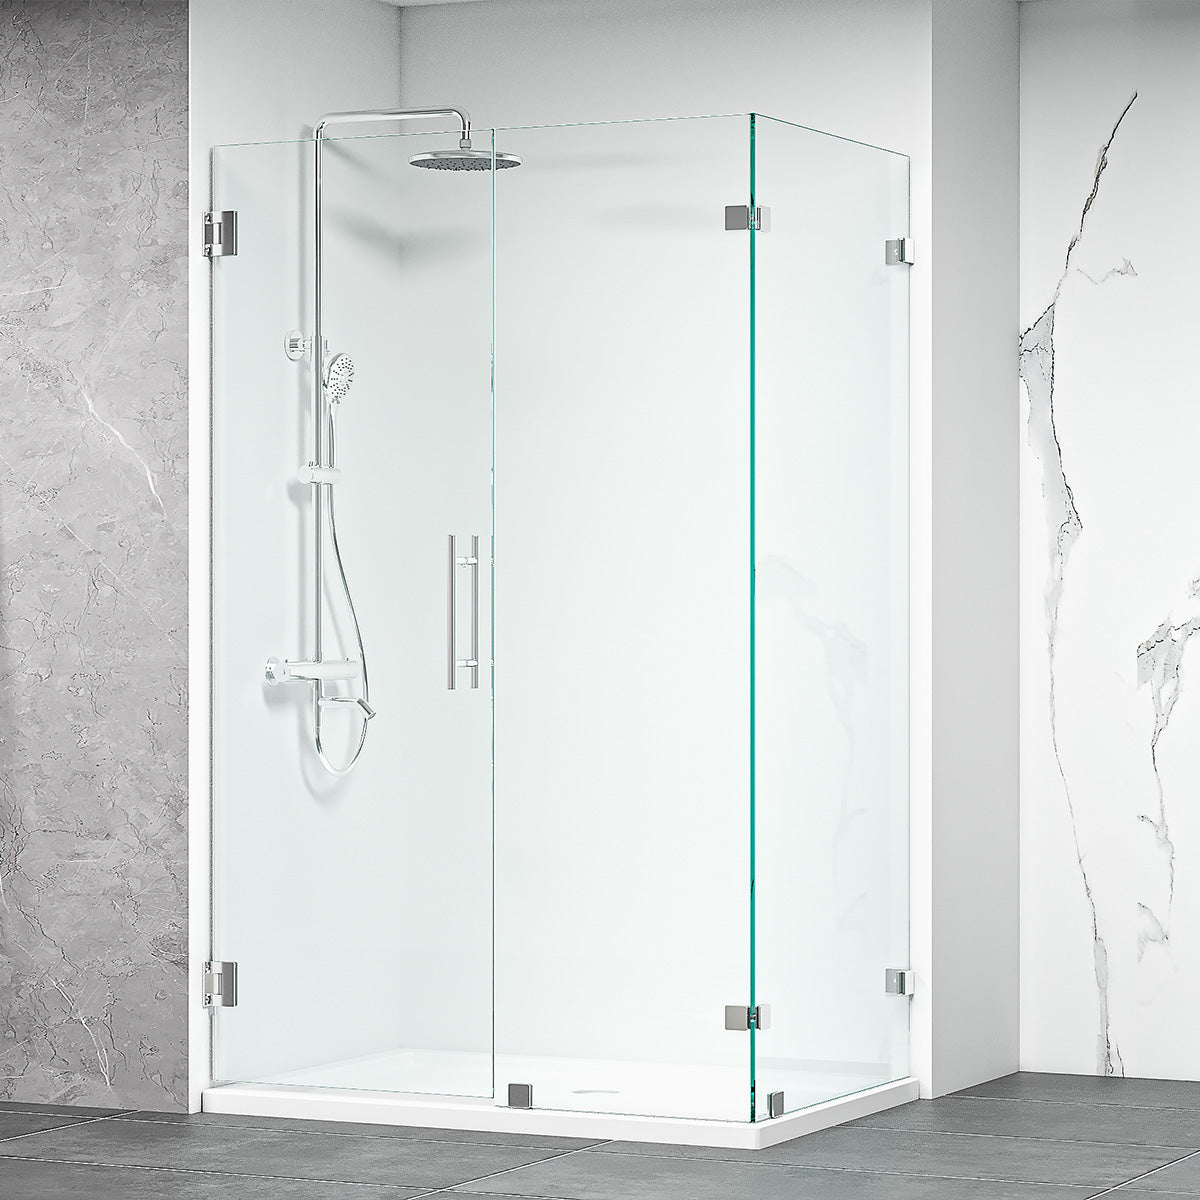 Miko's Hinges on Wall Shower Enclosure Chrome